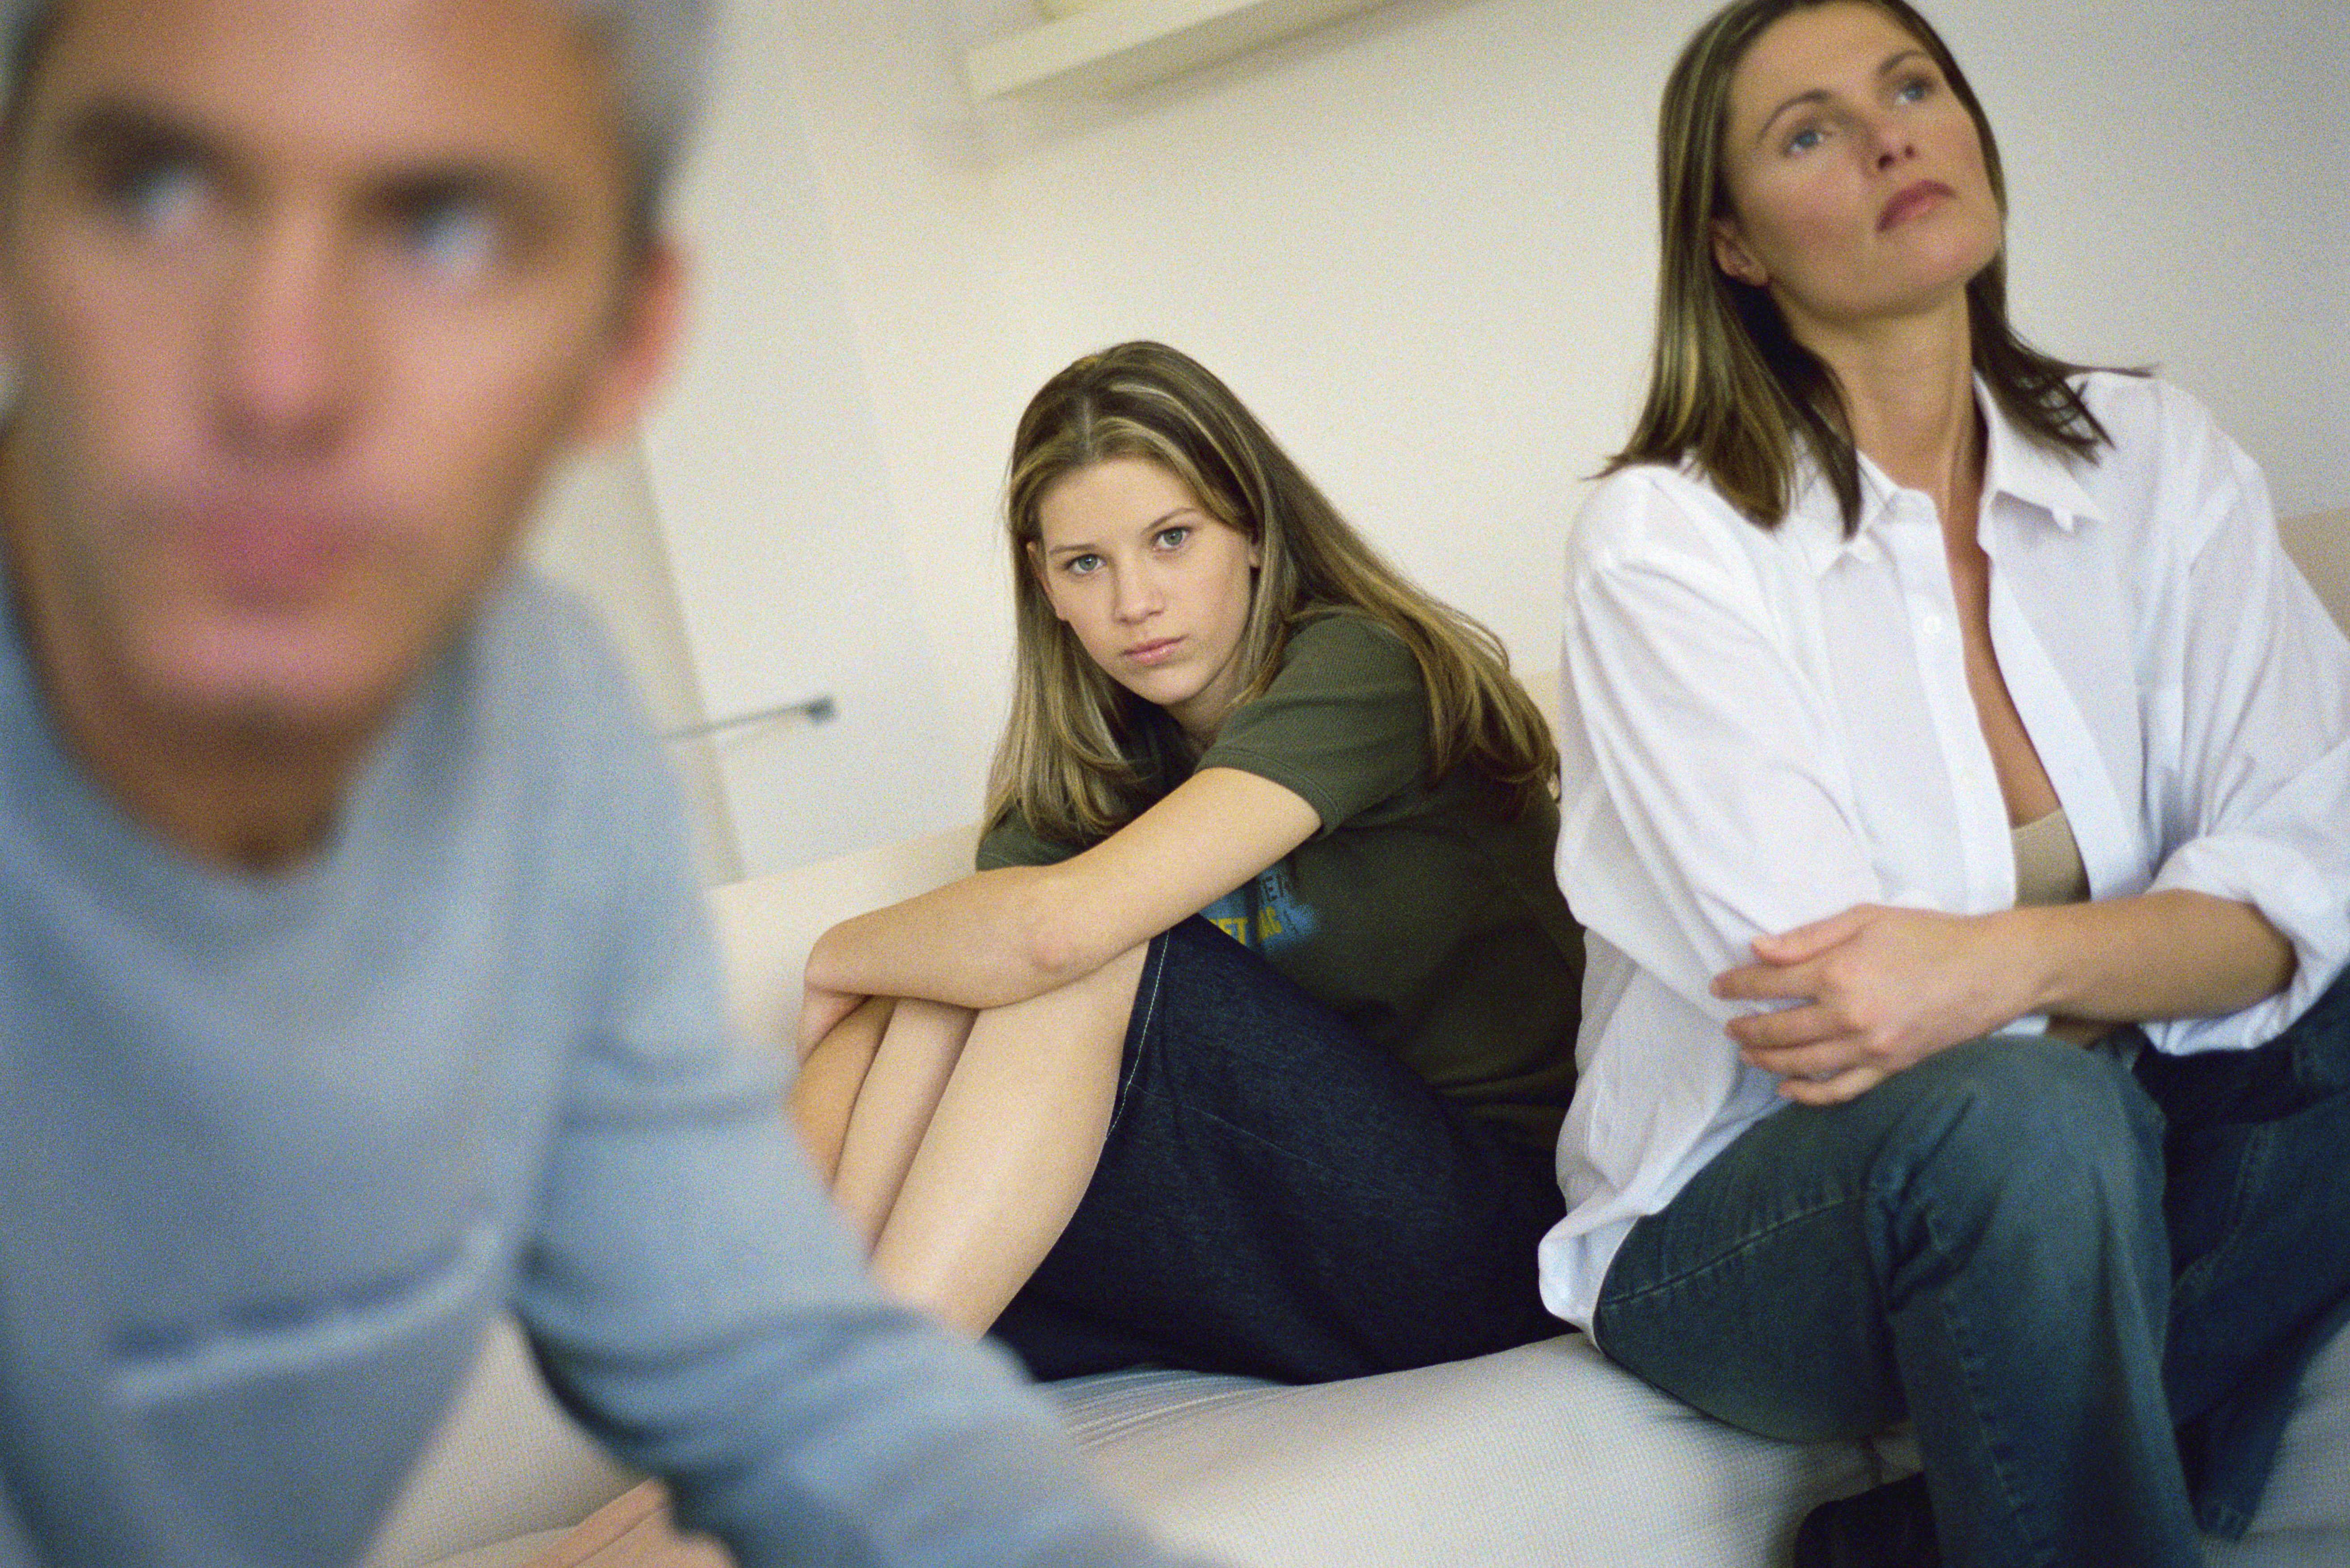 Teenage girl sitting on bed hugging knees, parents sitting nearby looking away with air of frustration | Source: Getty Images